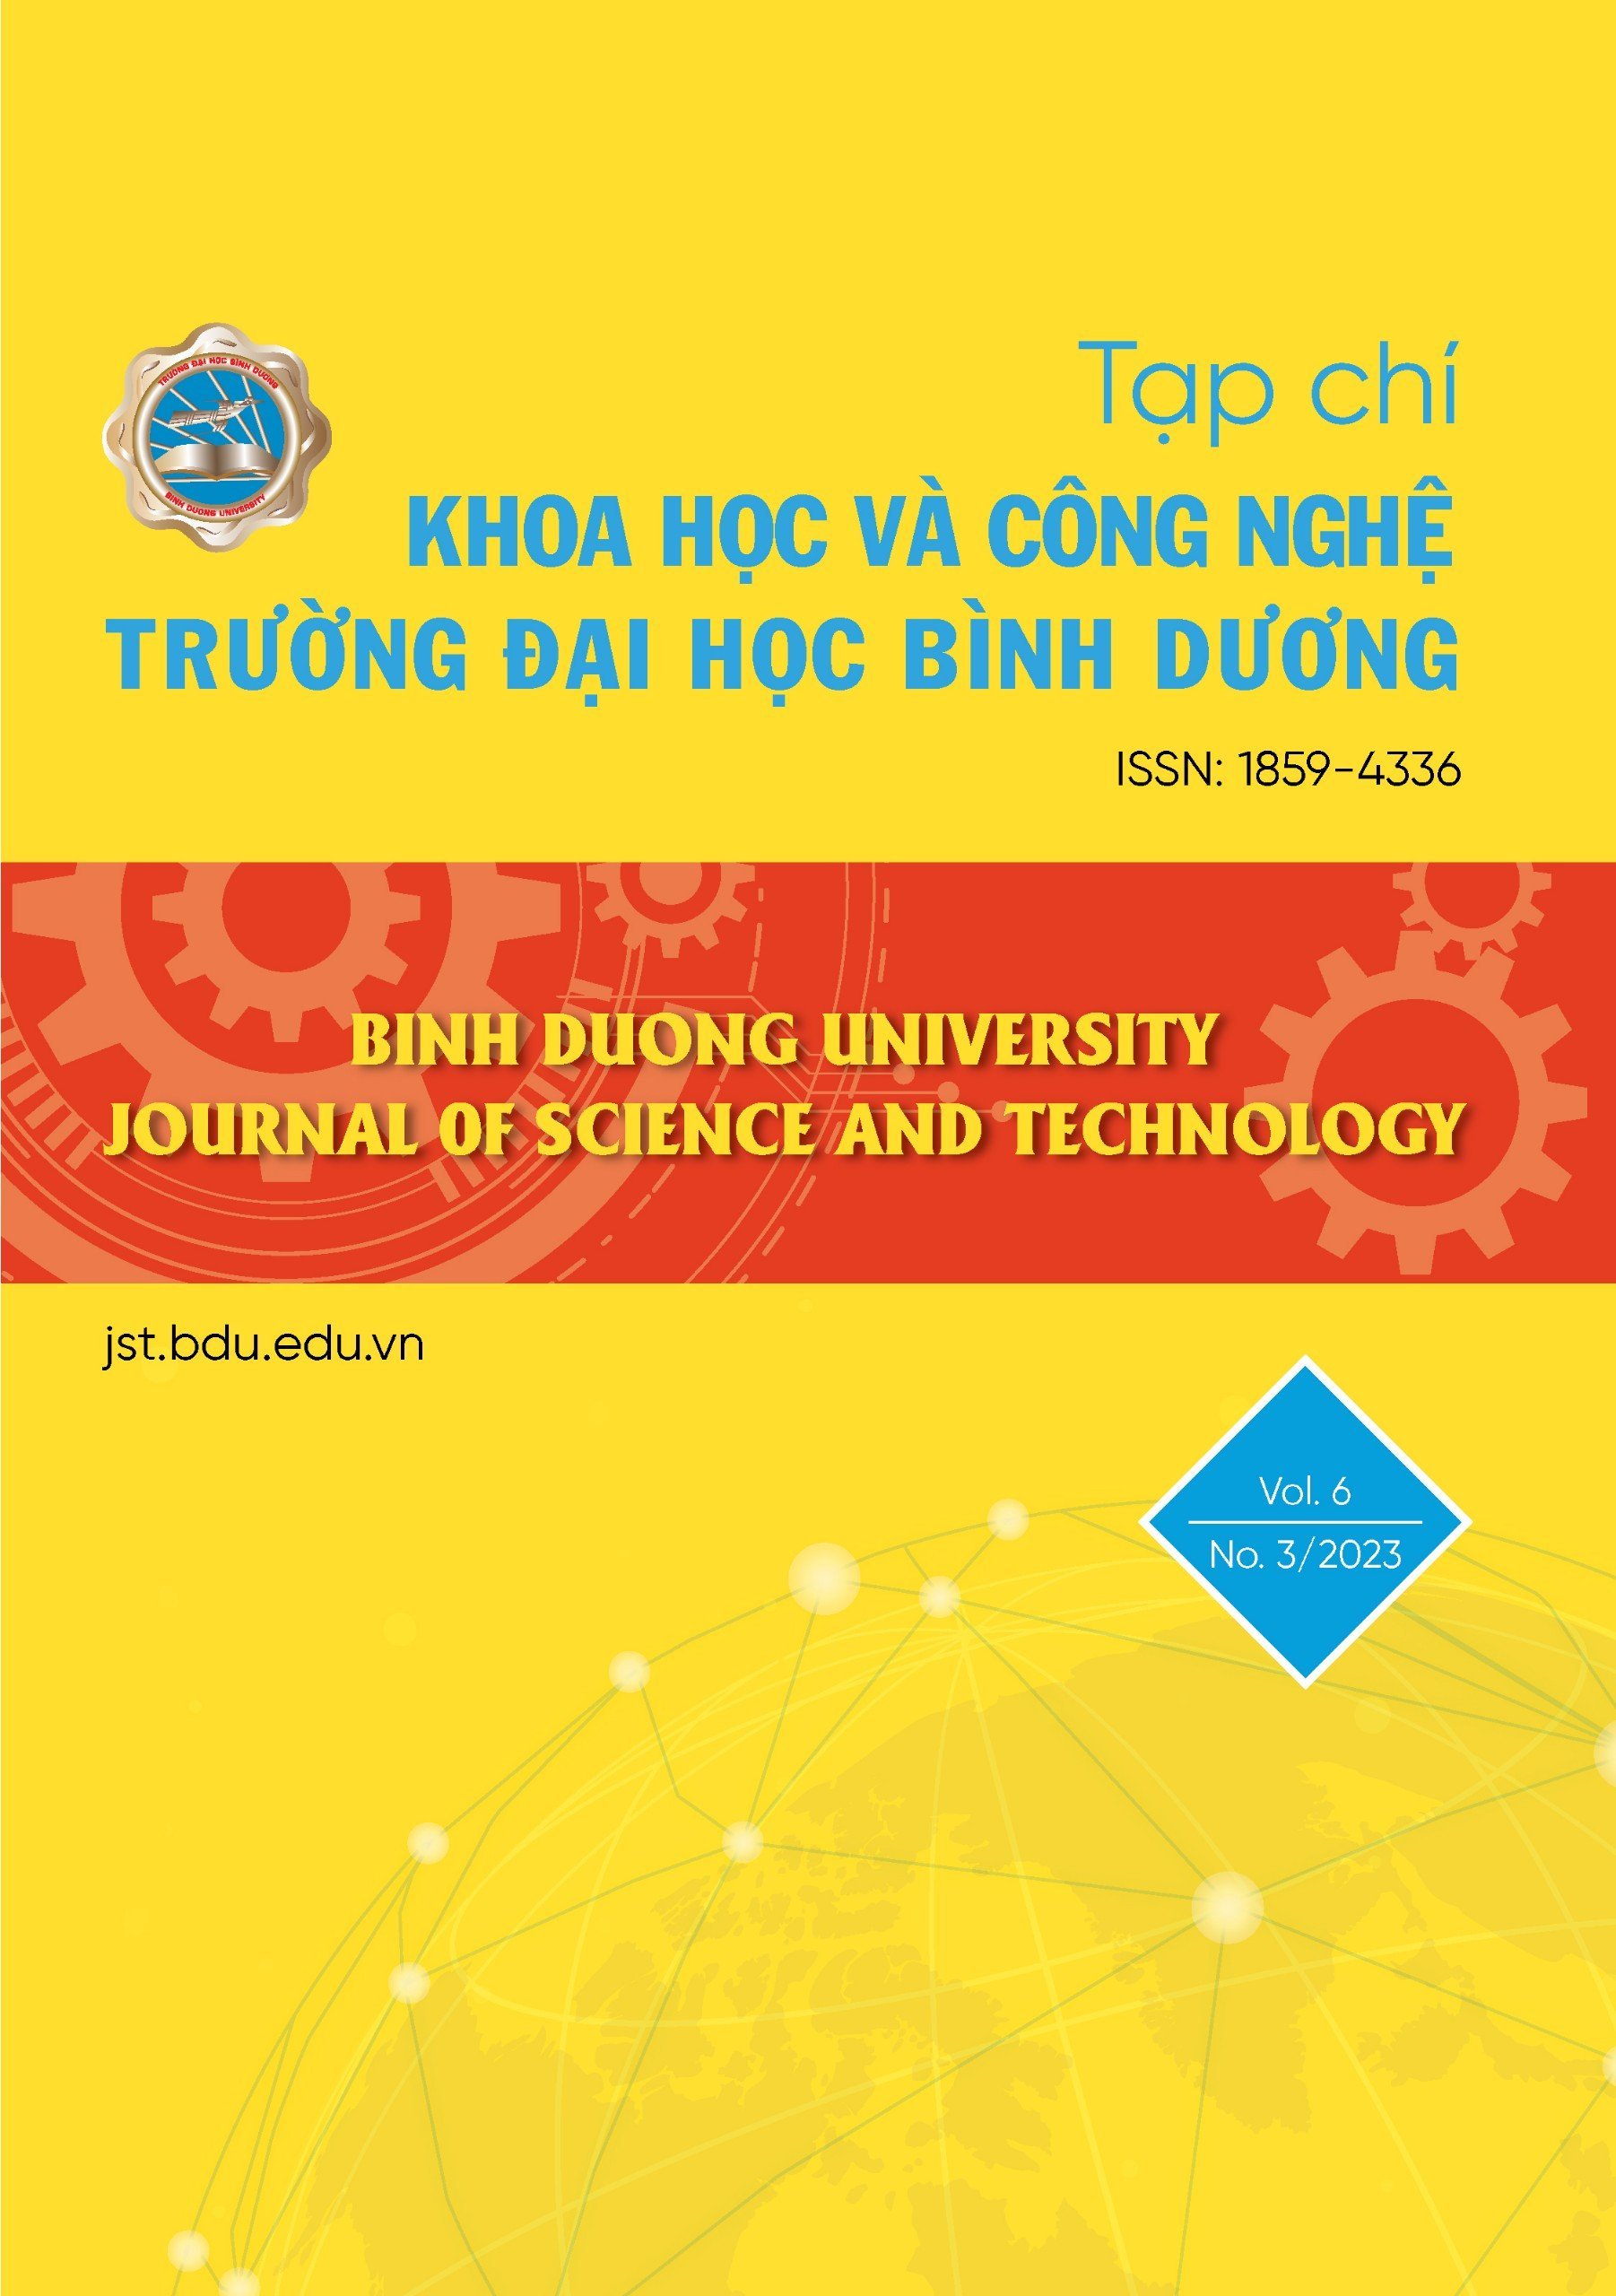 					View Vol. 6 No. 3 (2023): Vol. 6 No. 3 (2023): BINH DUONG UNIVERSITY JOURNAL OF SCIENCE AND TECHNOLOGY
				